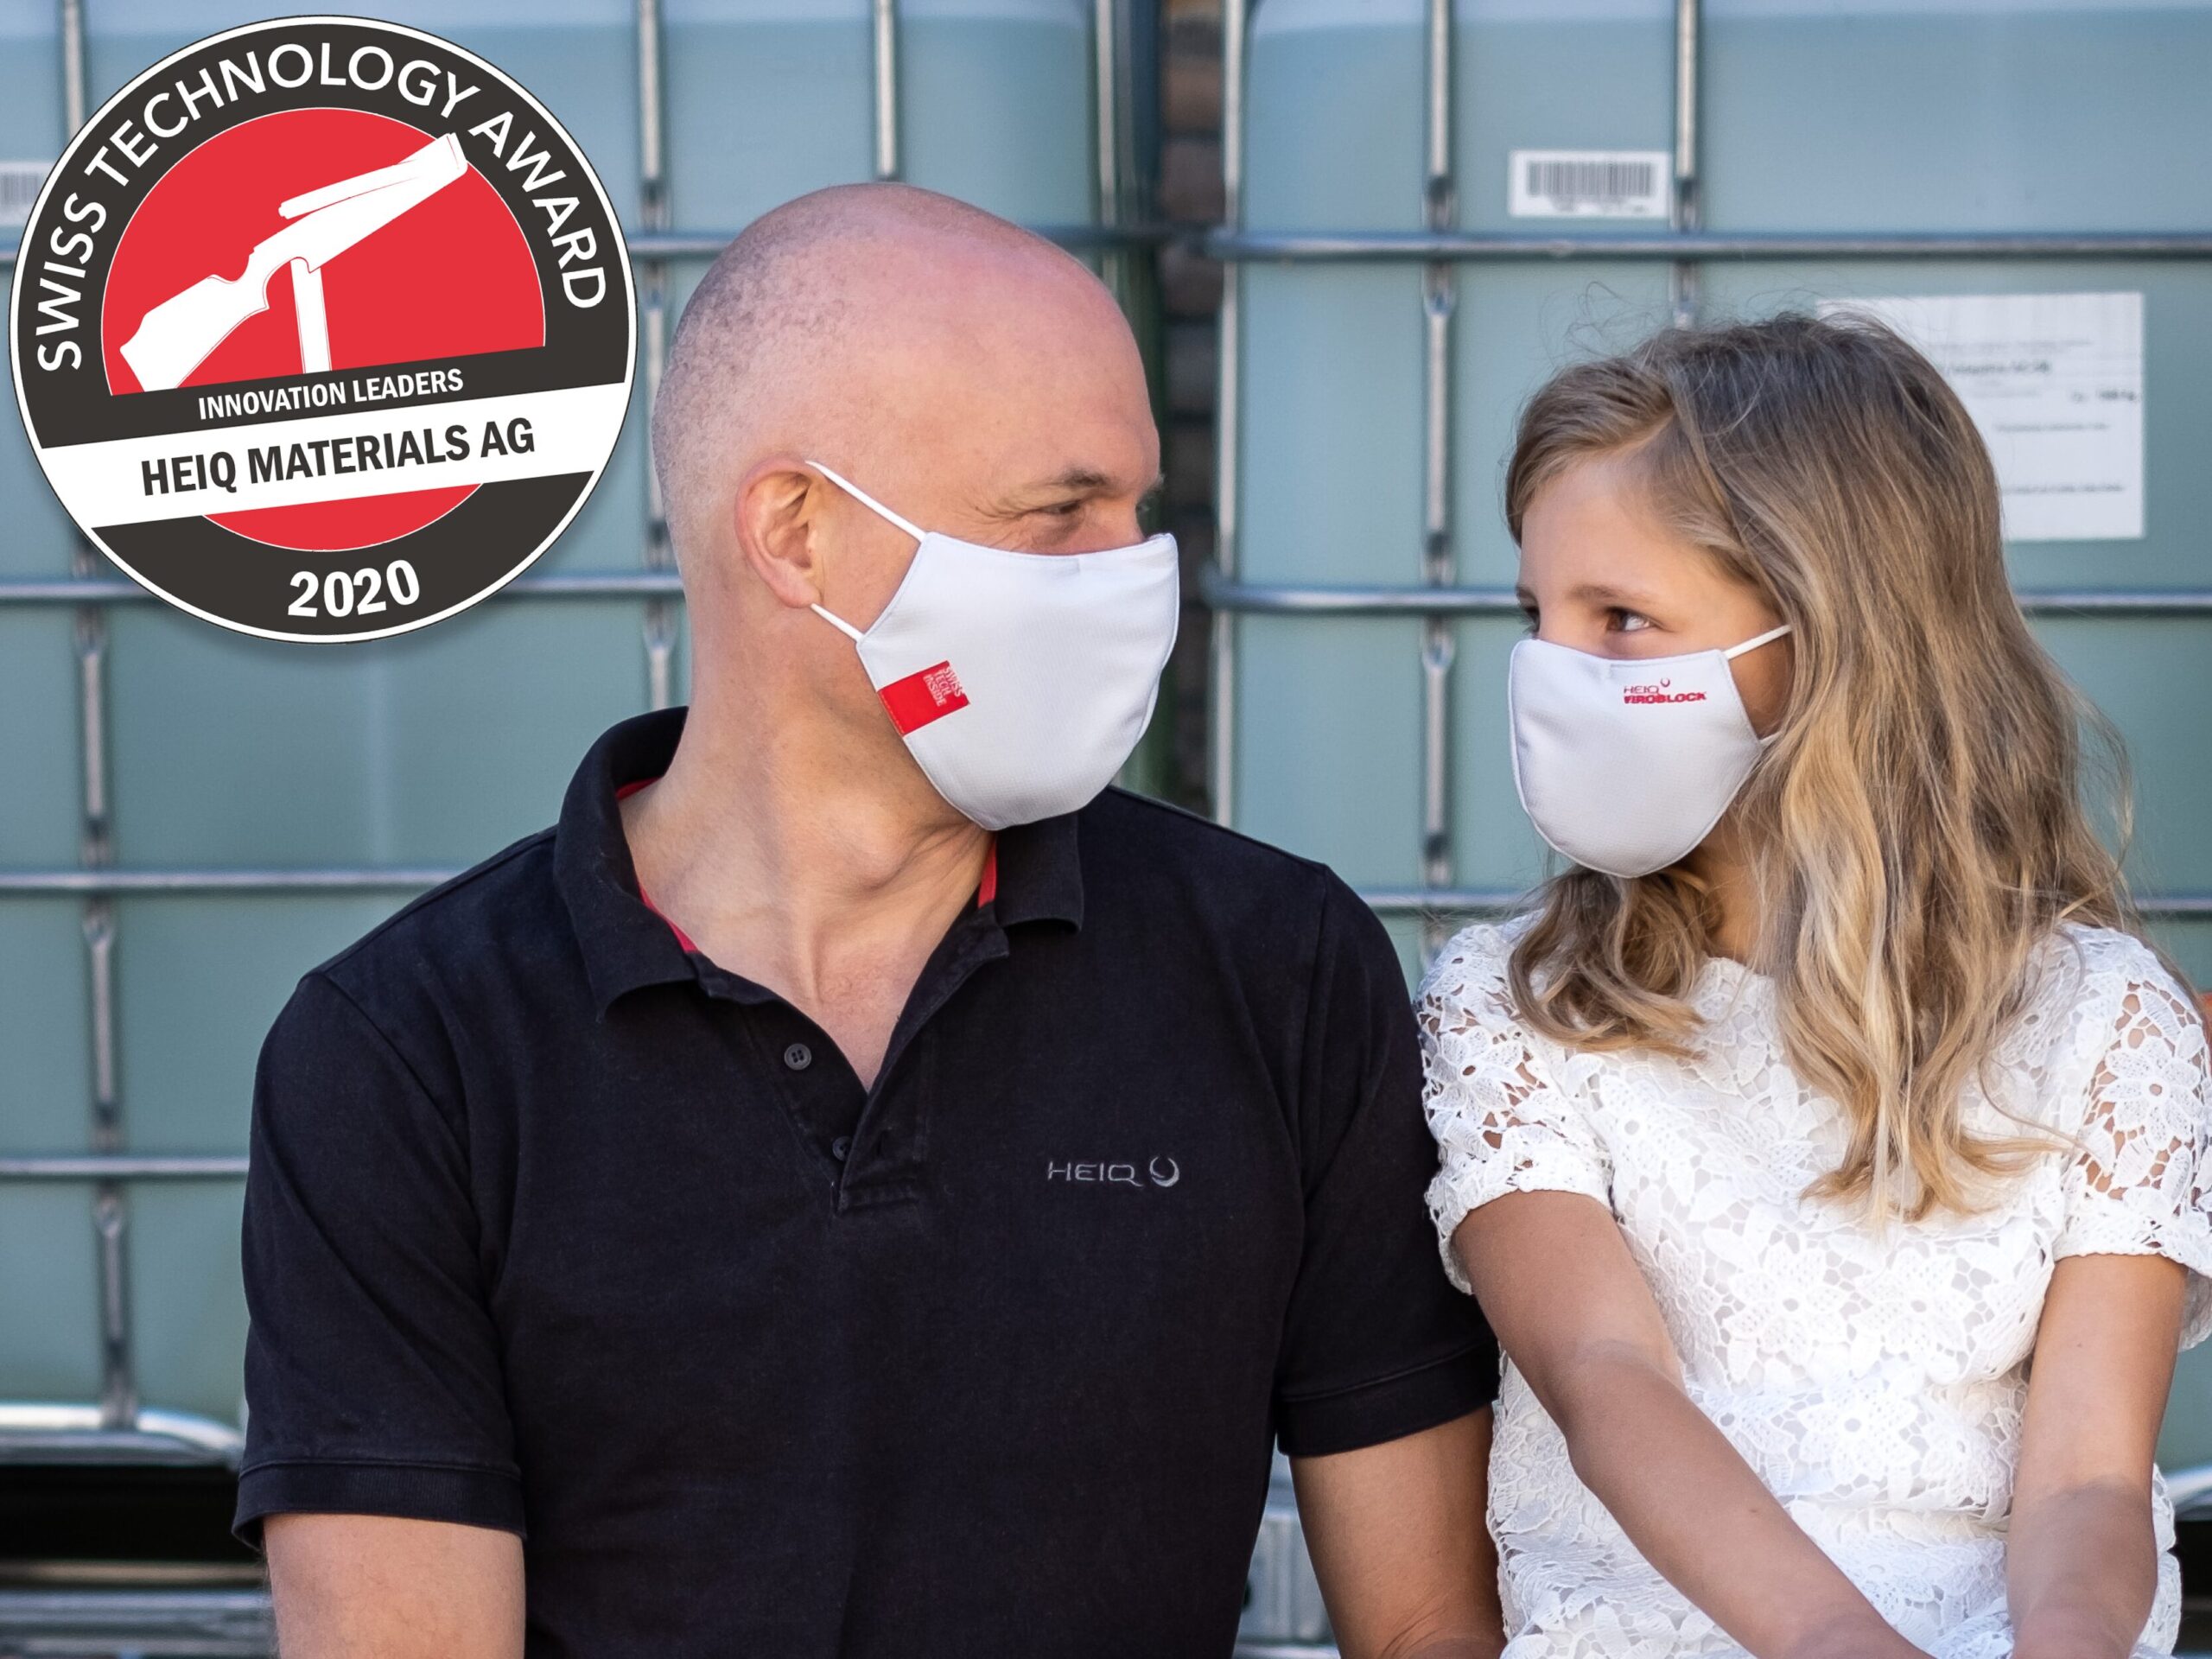 Two people wearing HeiQ Viroblock masks with an antimicrobial fabric treatment from Swiss Technology Award winner HeiQ Materials AG